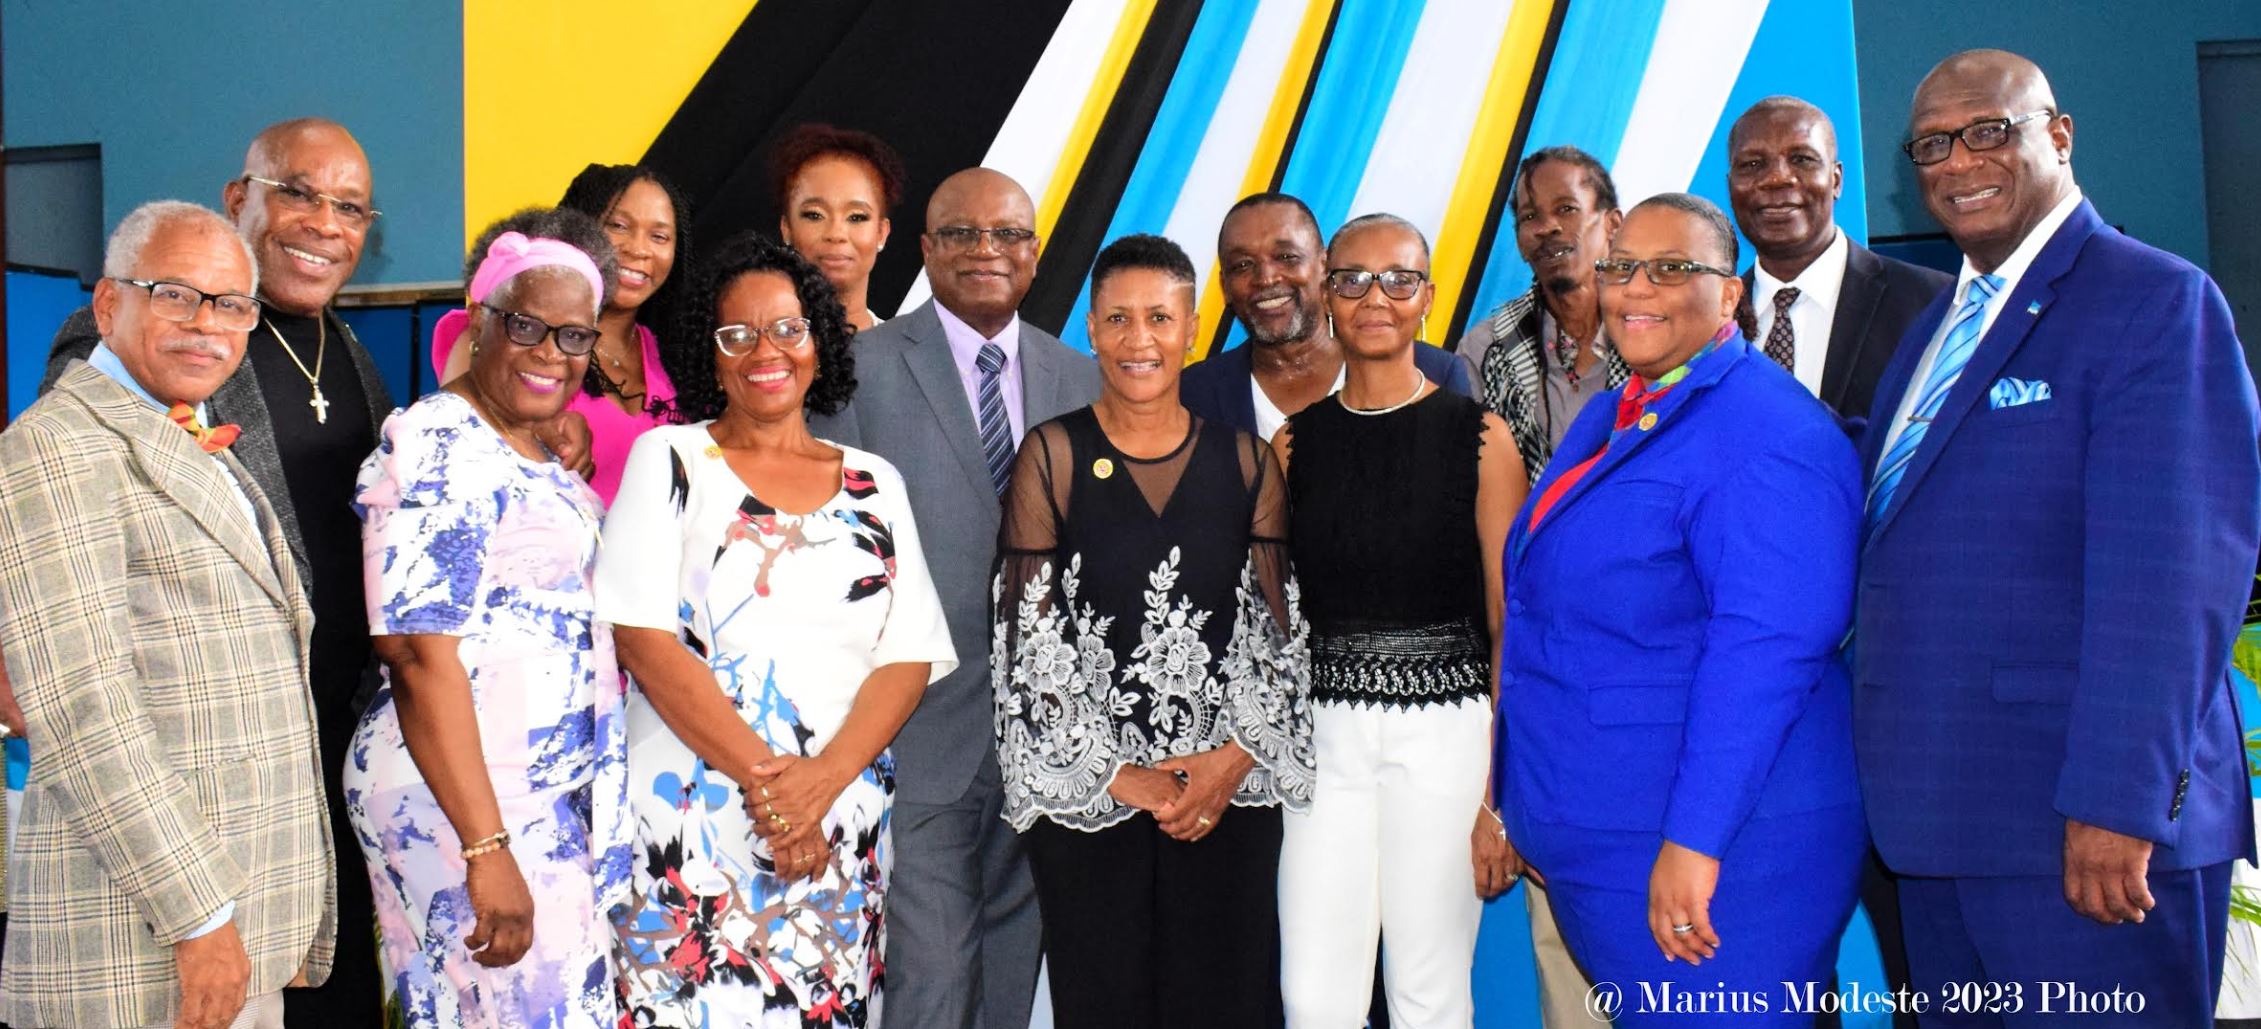 Officials pose for a photo after signing twinning agreement between the Cities of Castries in Saint Lucia and Point Fortin in Trinidad and Tobago.